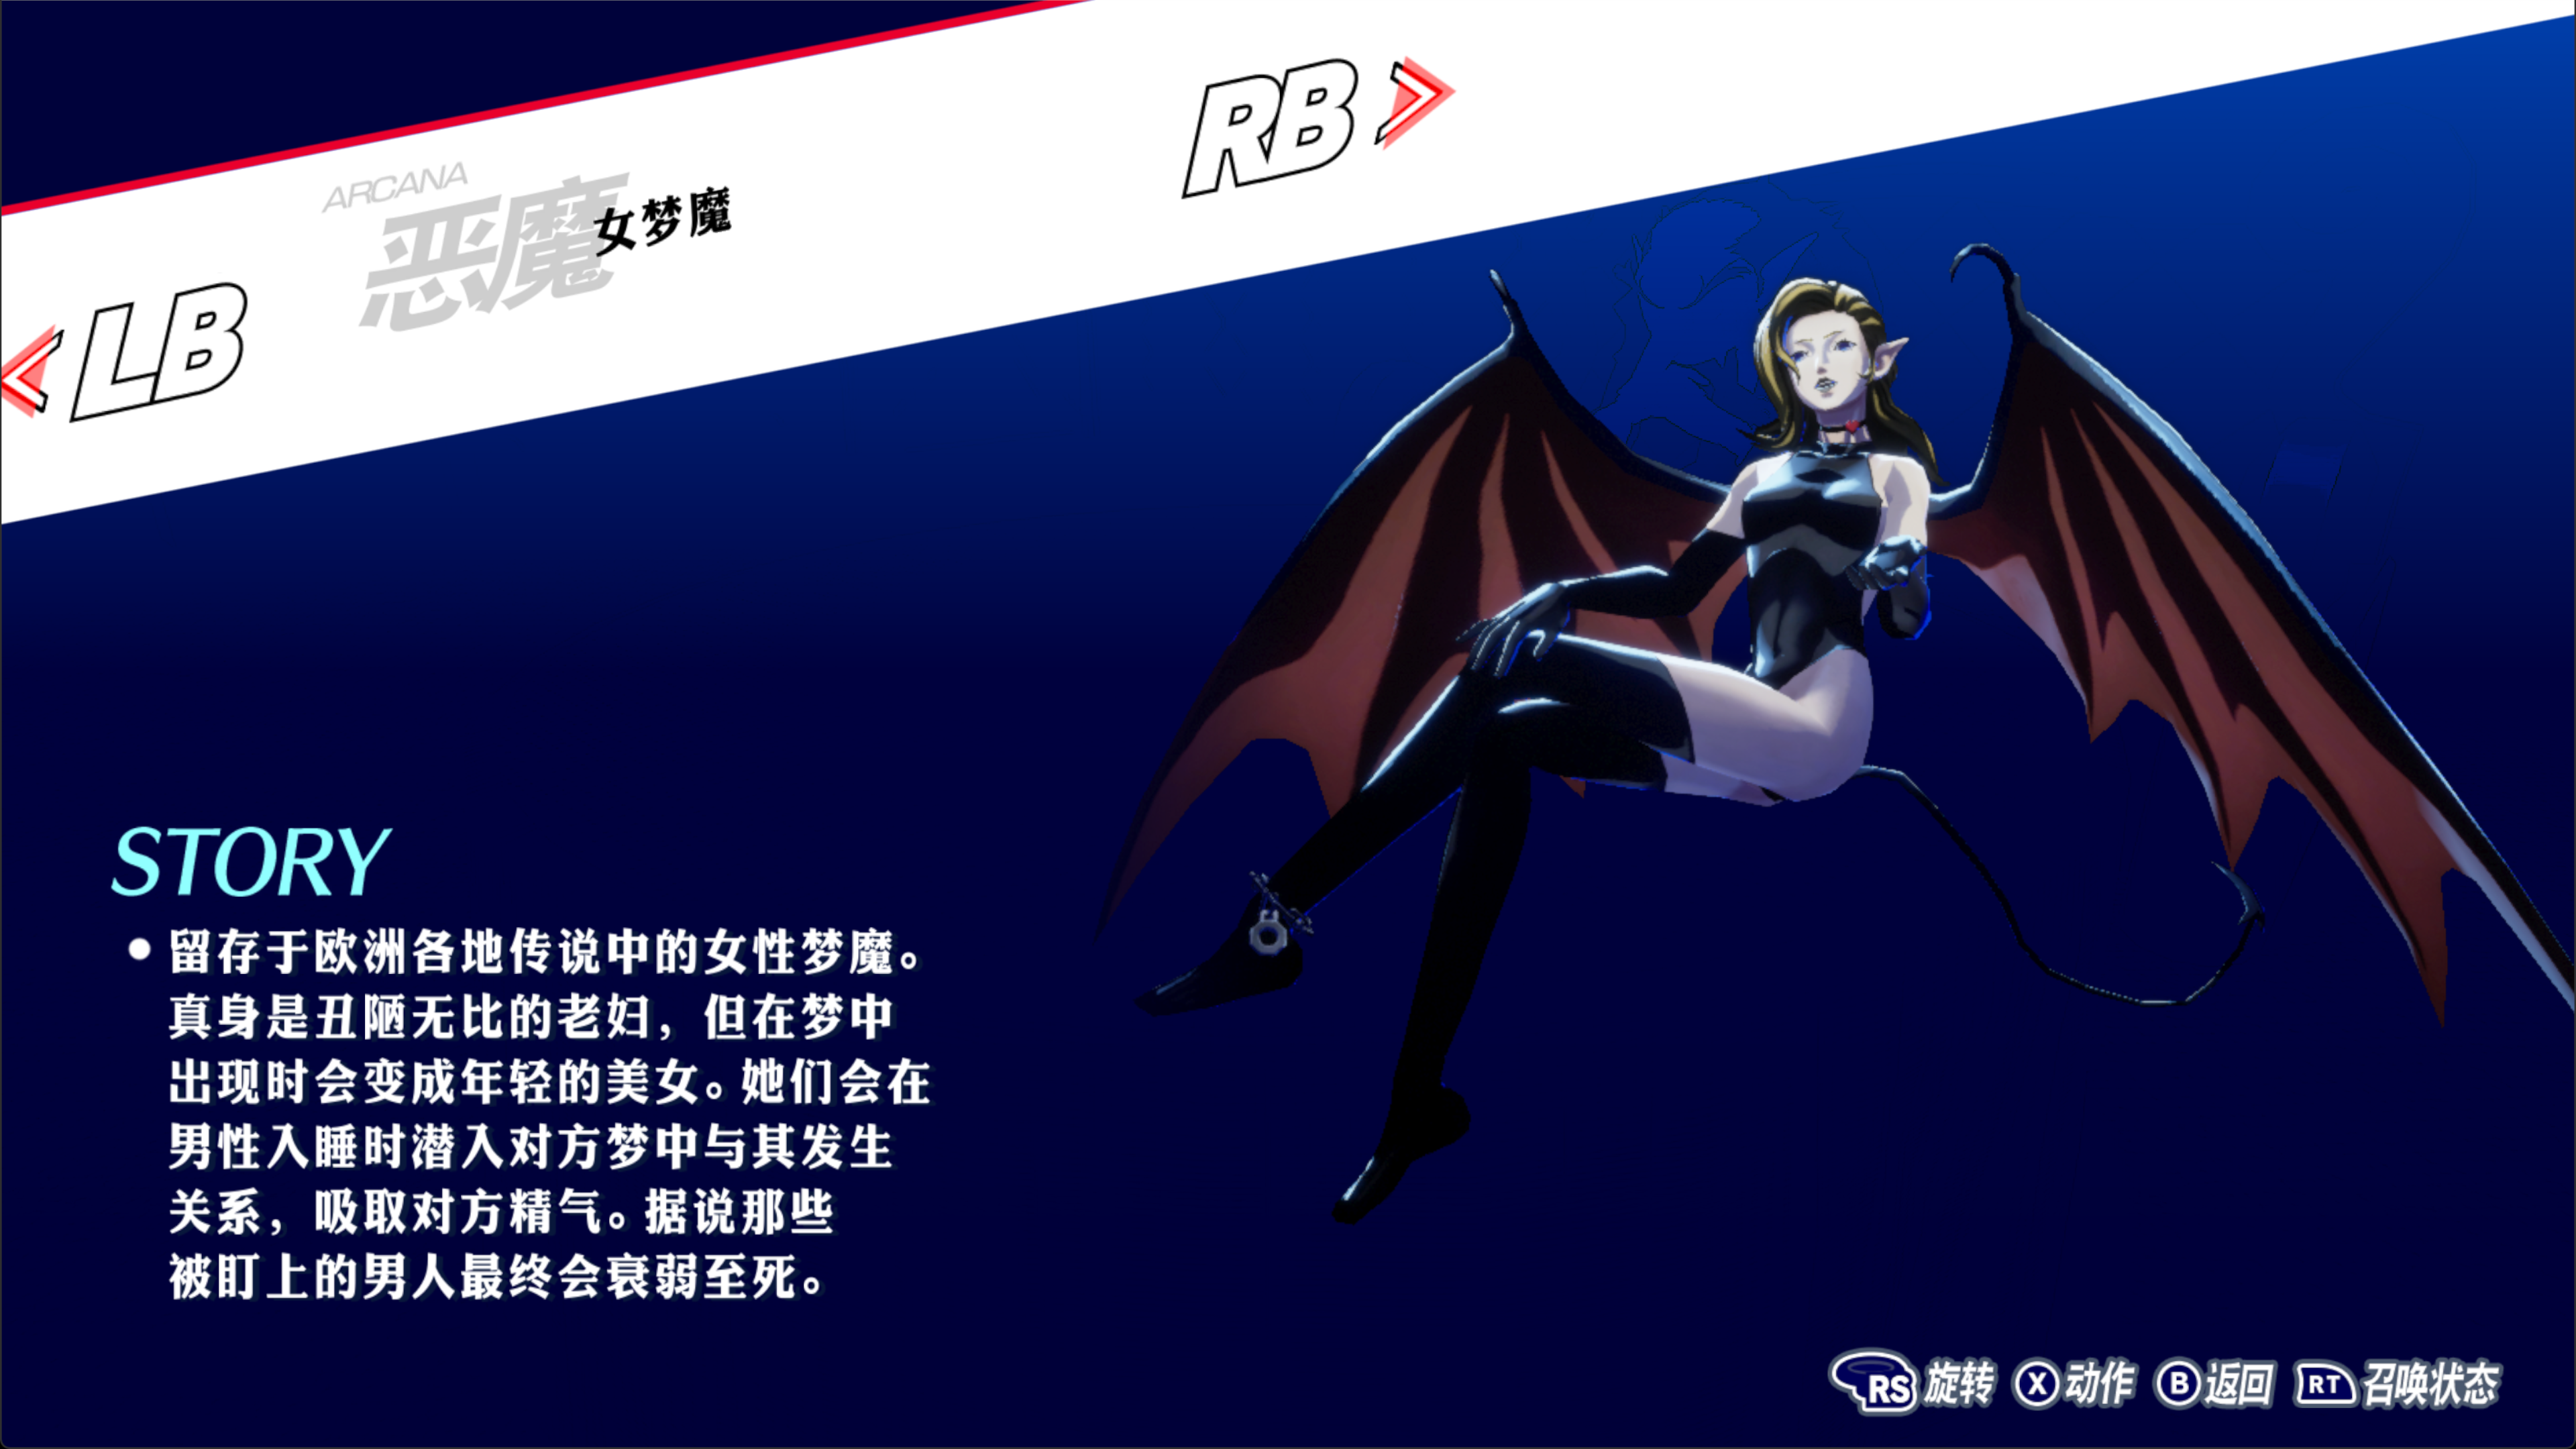 P3R 女梦魔图鉴.png